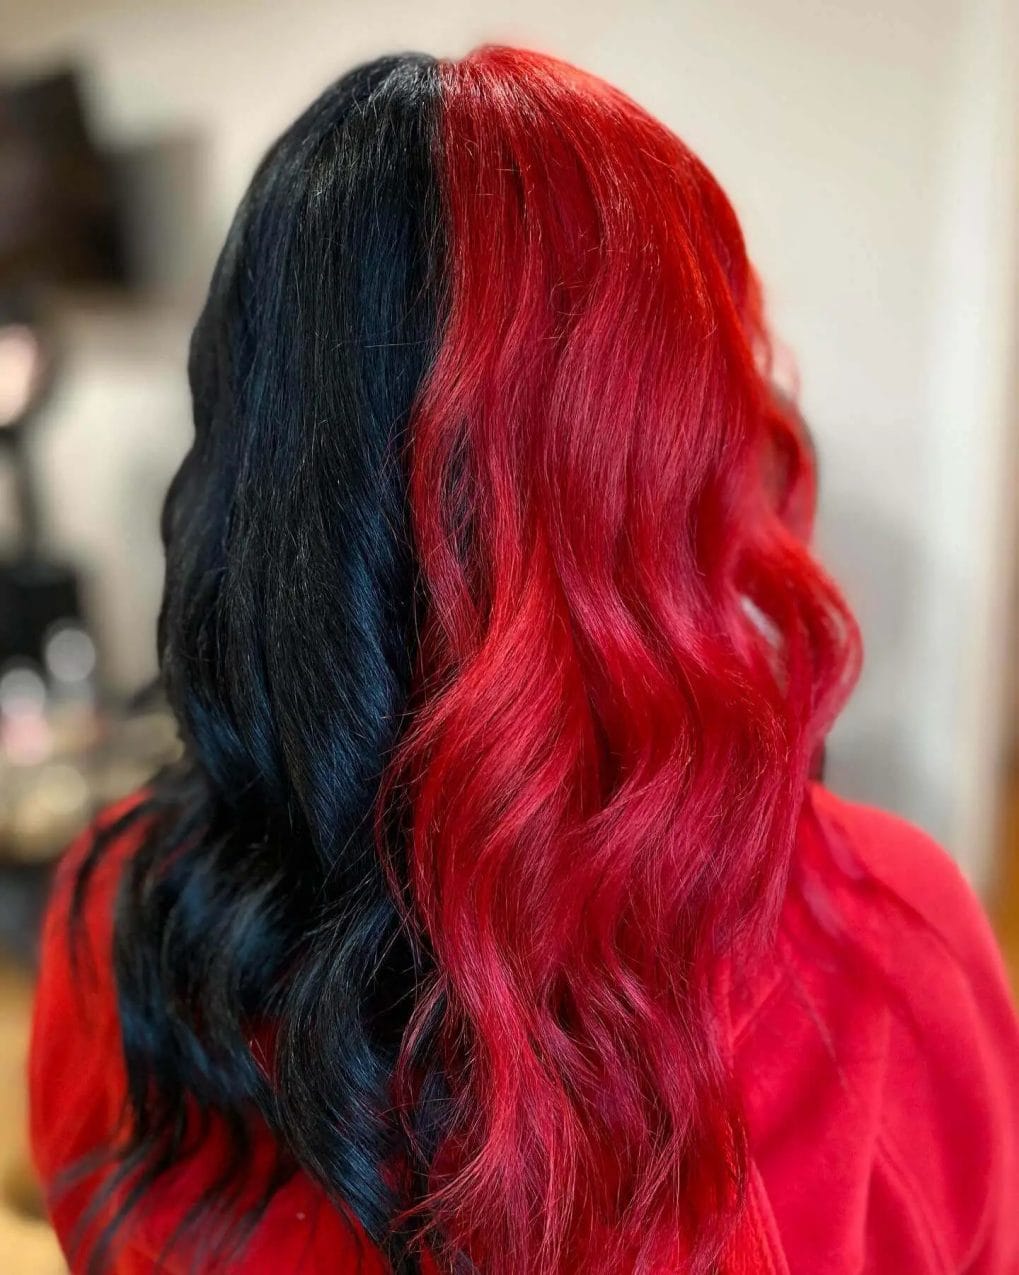 Fiery red fading to black with large elegant curls